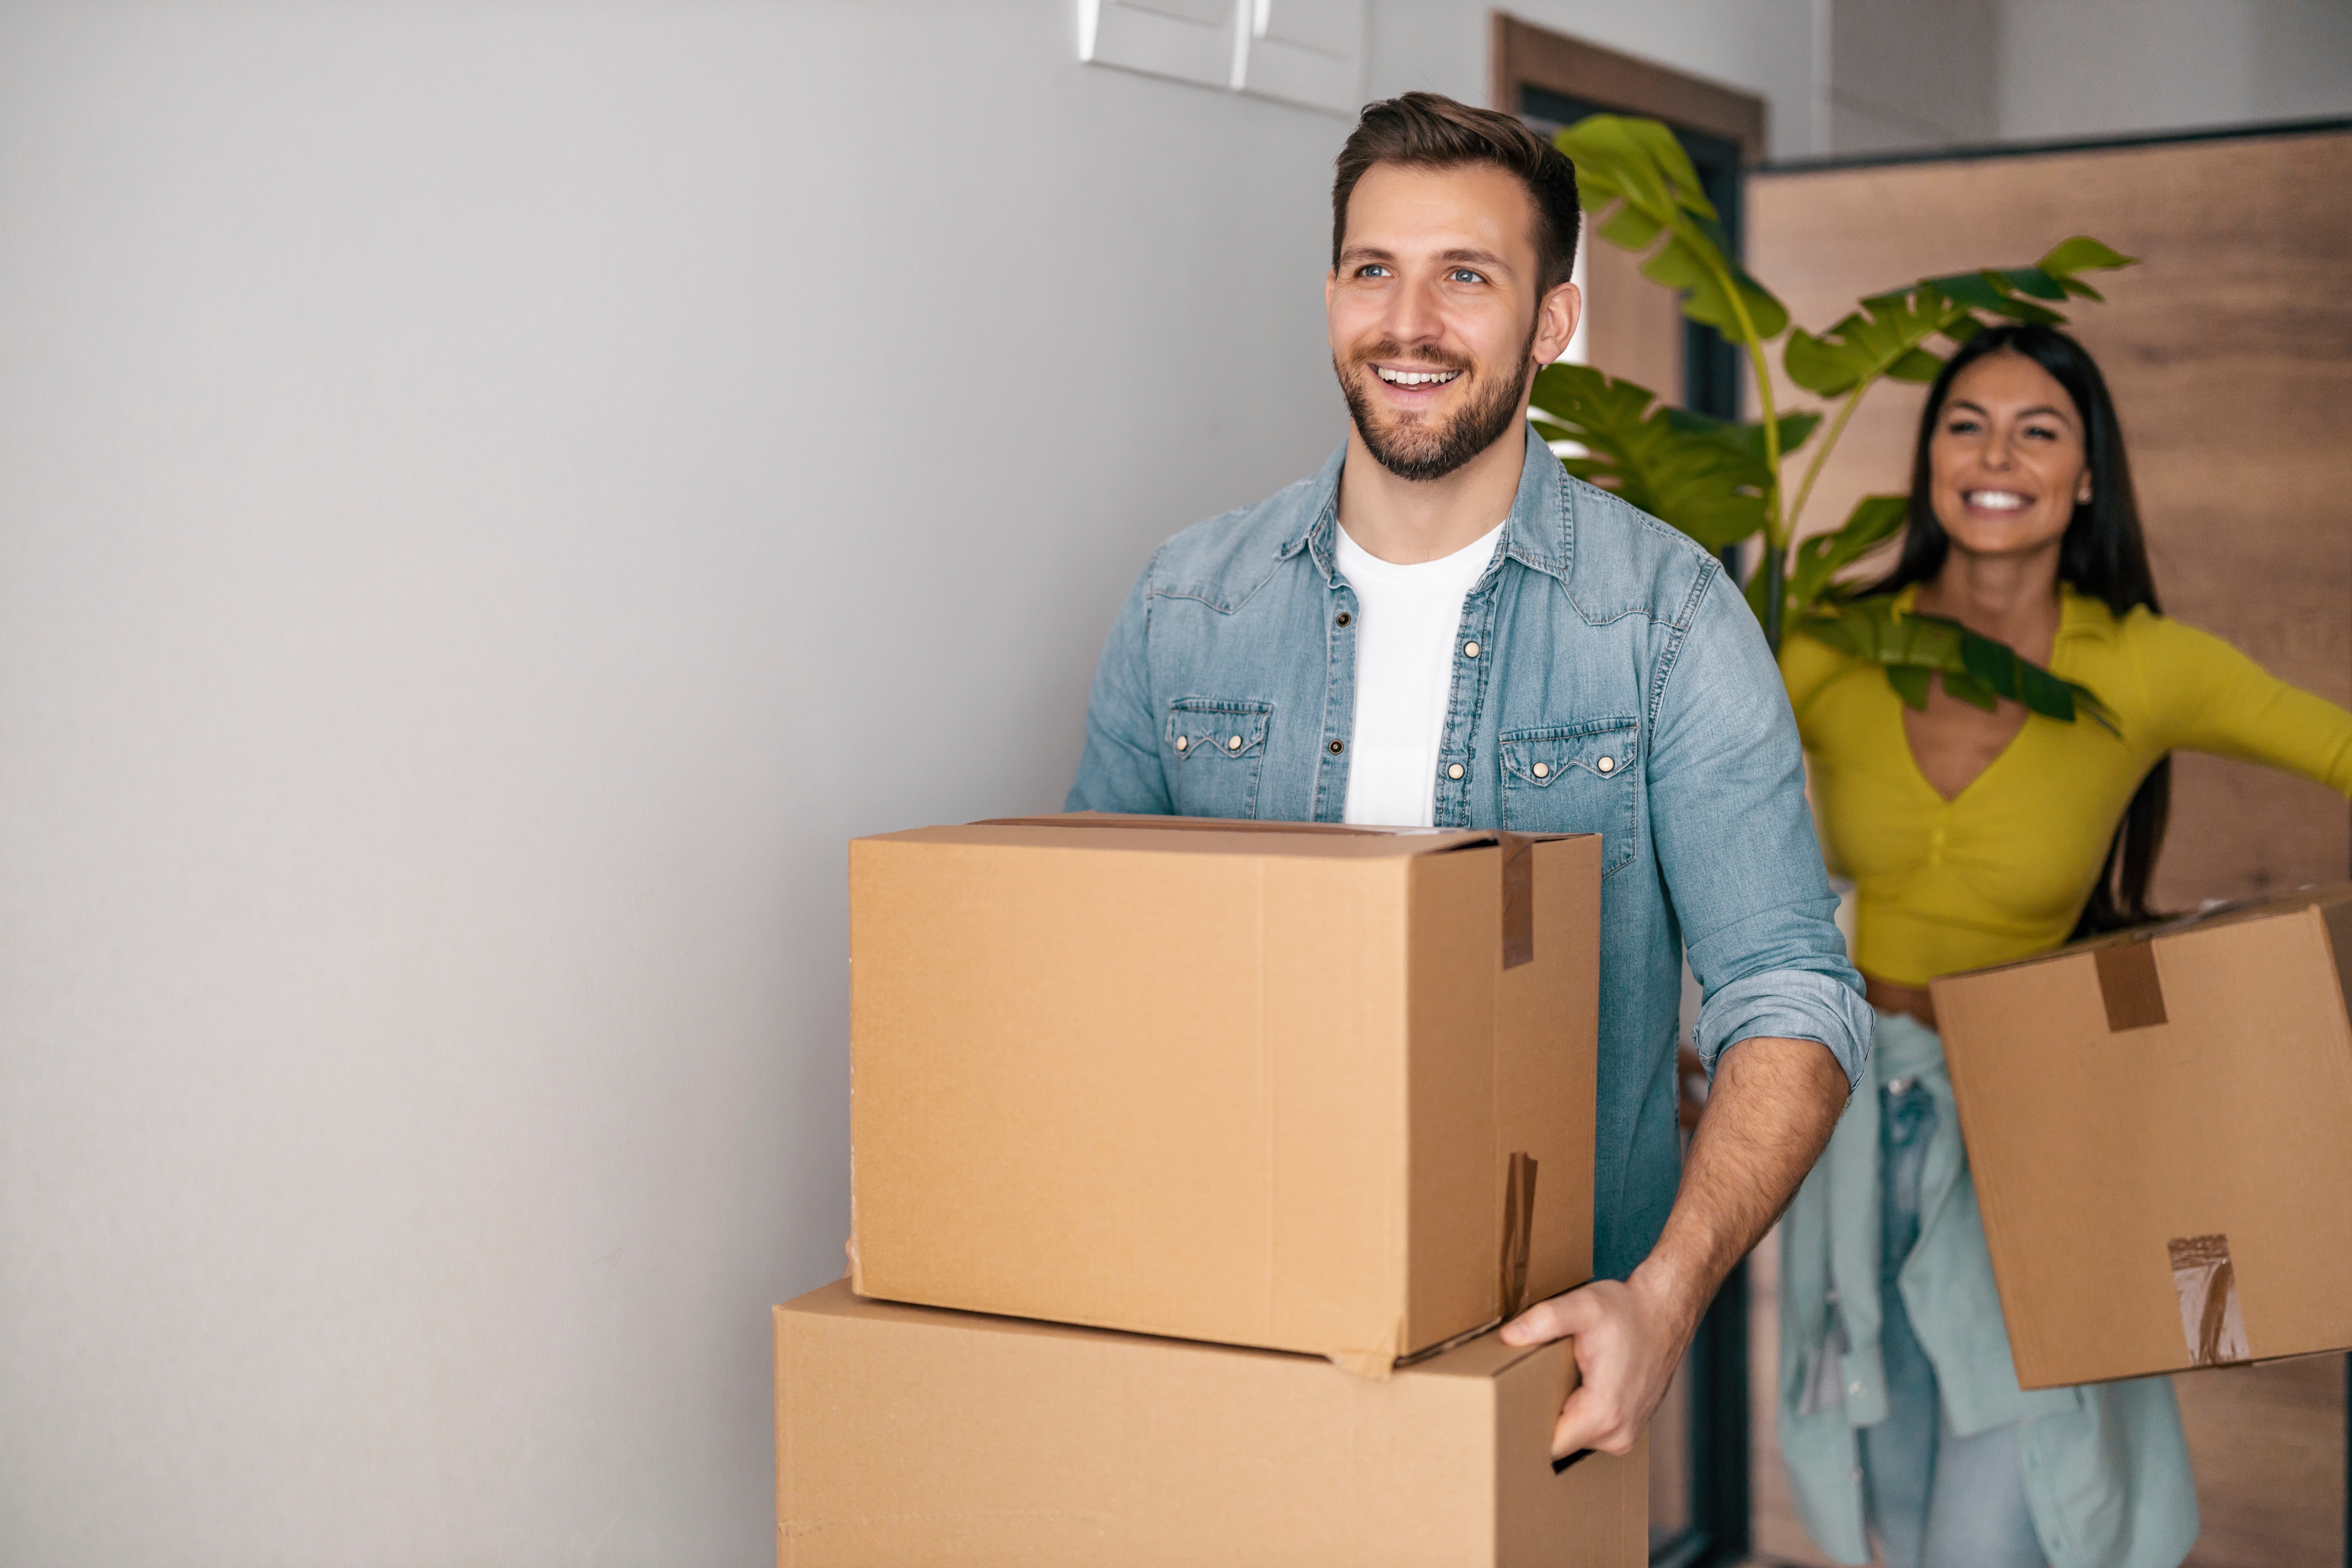 A happy couple holding cardboard boxes | Source: Shutterstock